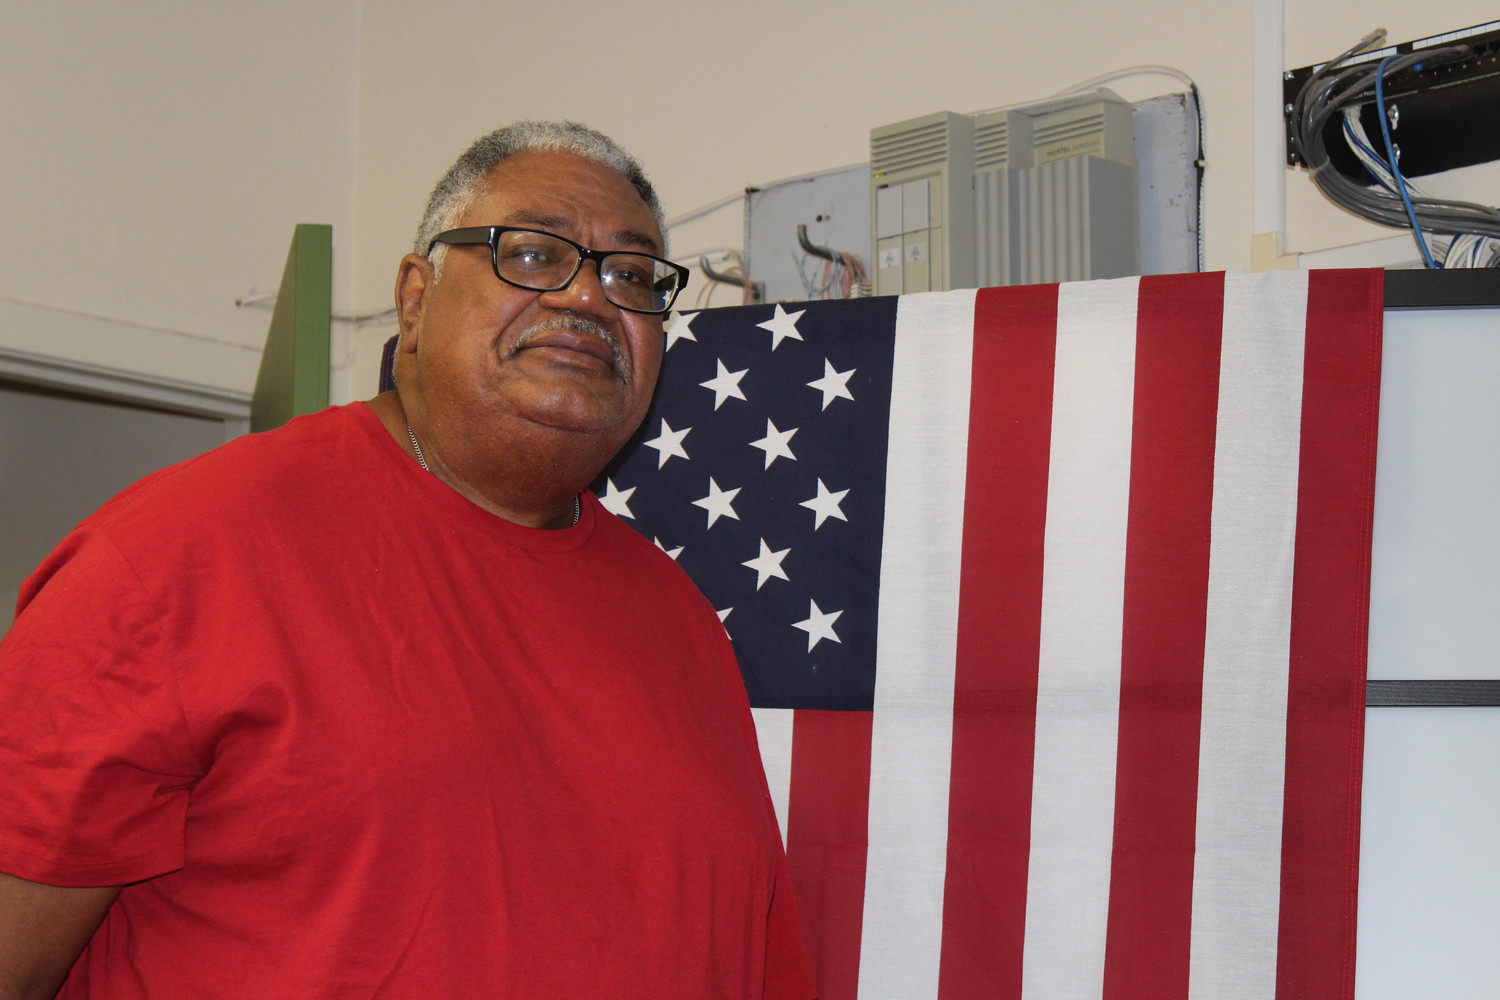 Longtime army veteran David Tucy has been named the new Gonzales County Veterans Service Officer. The lifelong Gonzales resident is happy to serve and ready to help all veterans in need.